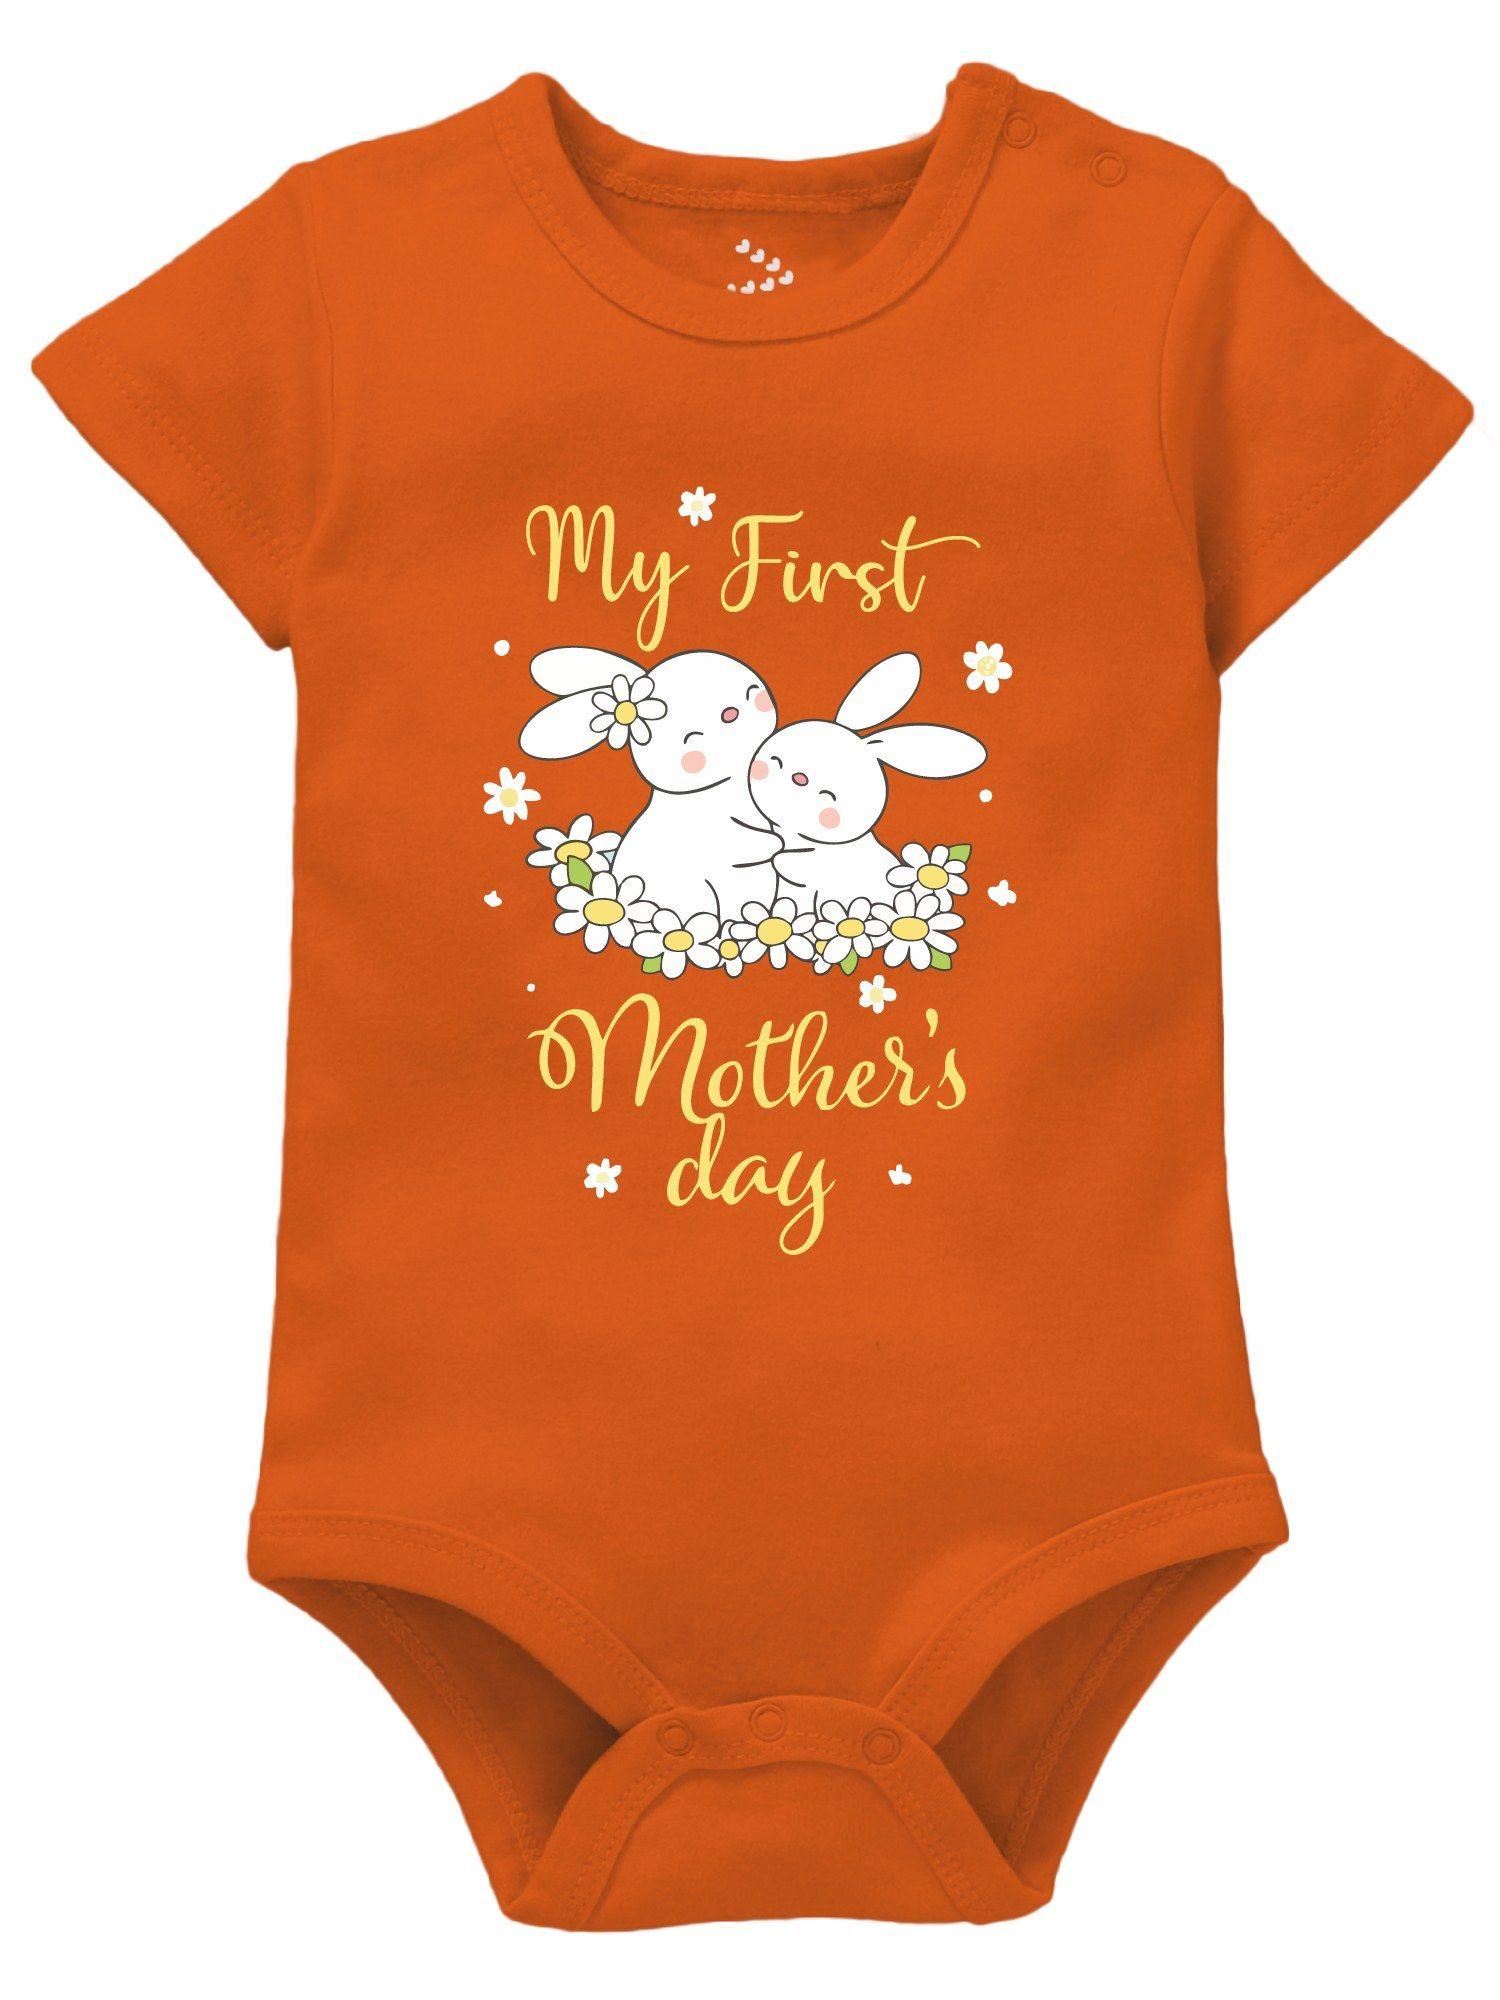 my first mothers day baby bodysuit outfit newborn orange